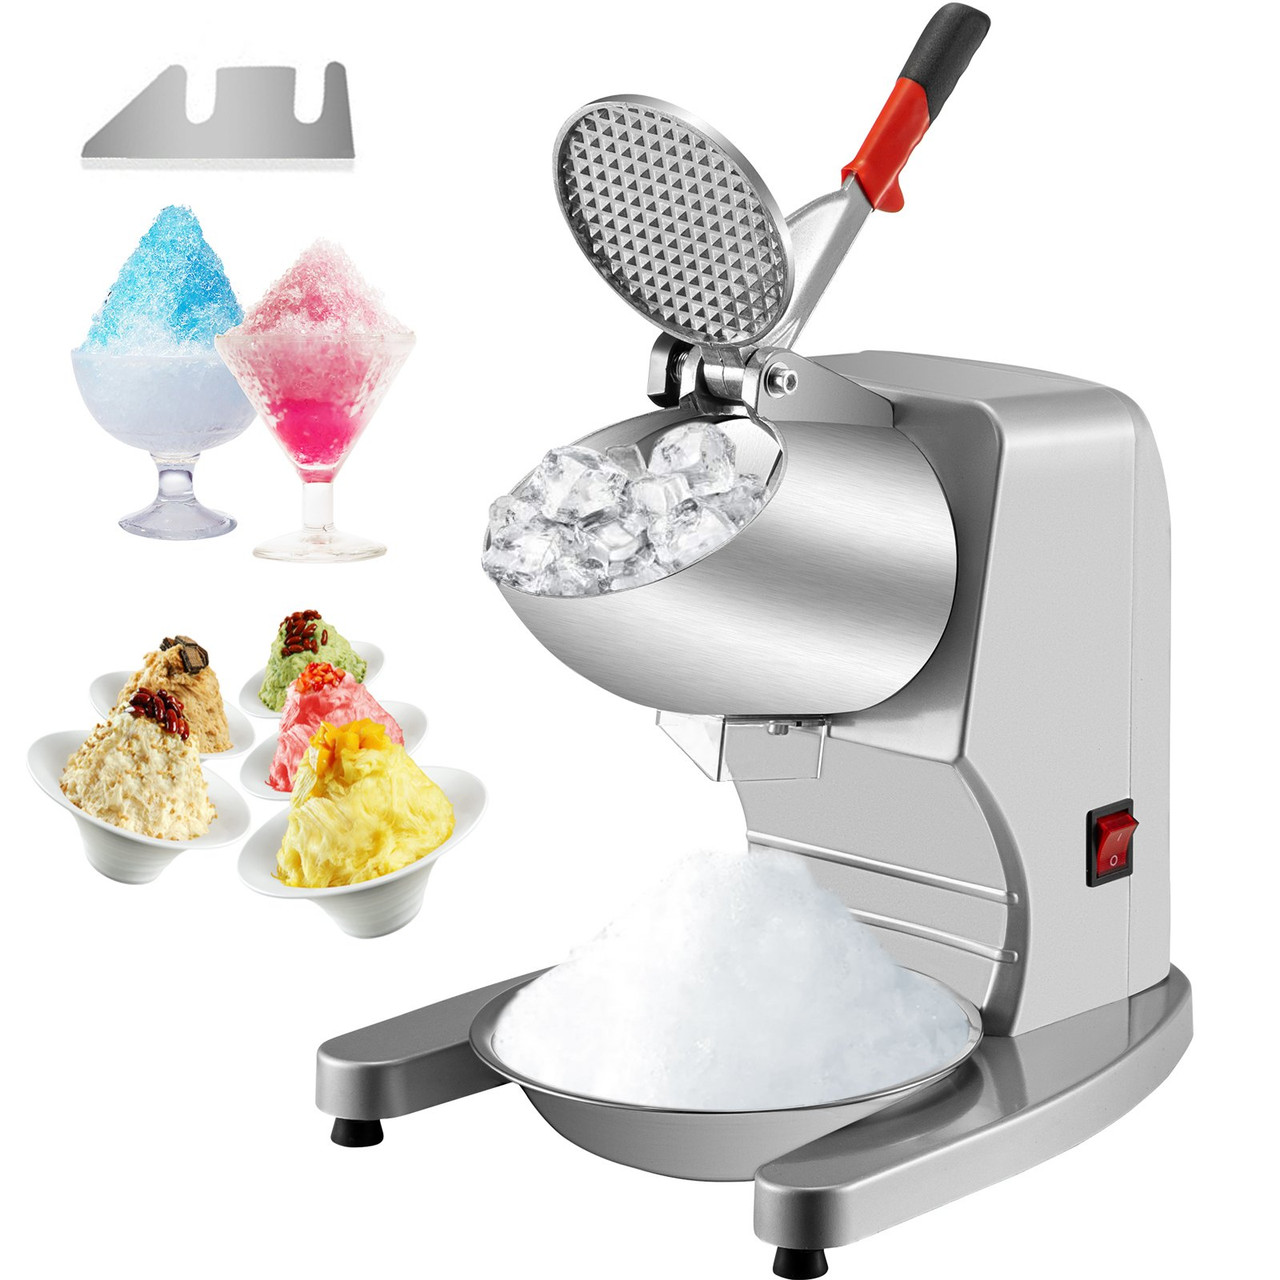 110V Electric Ice Shaver Crusher,300W 1450 RPM Snow Cone Maker Machine with  Dual Stainless Steel